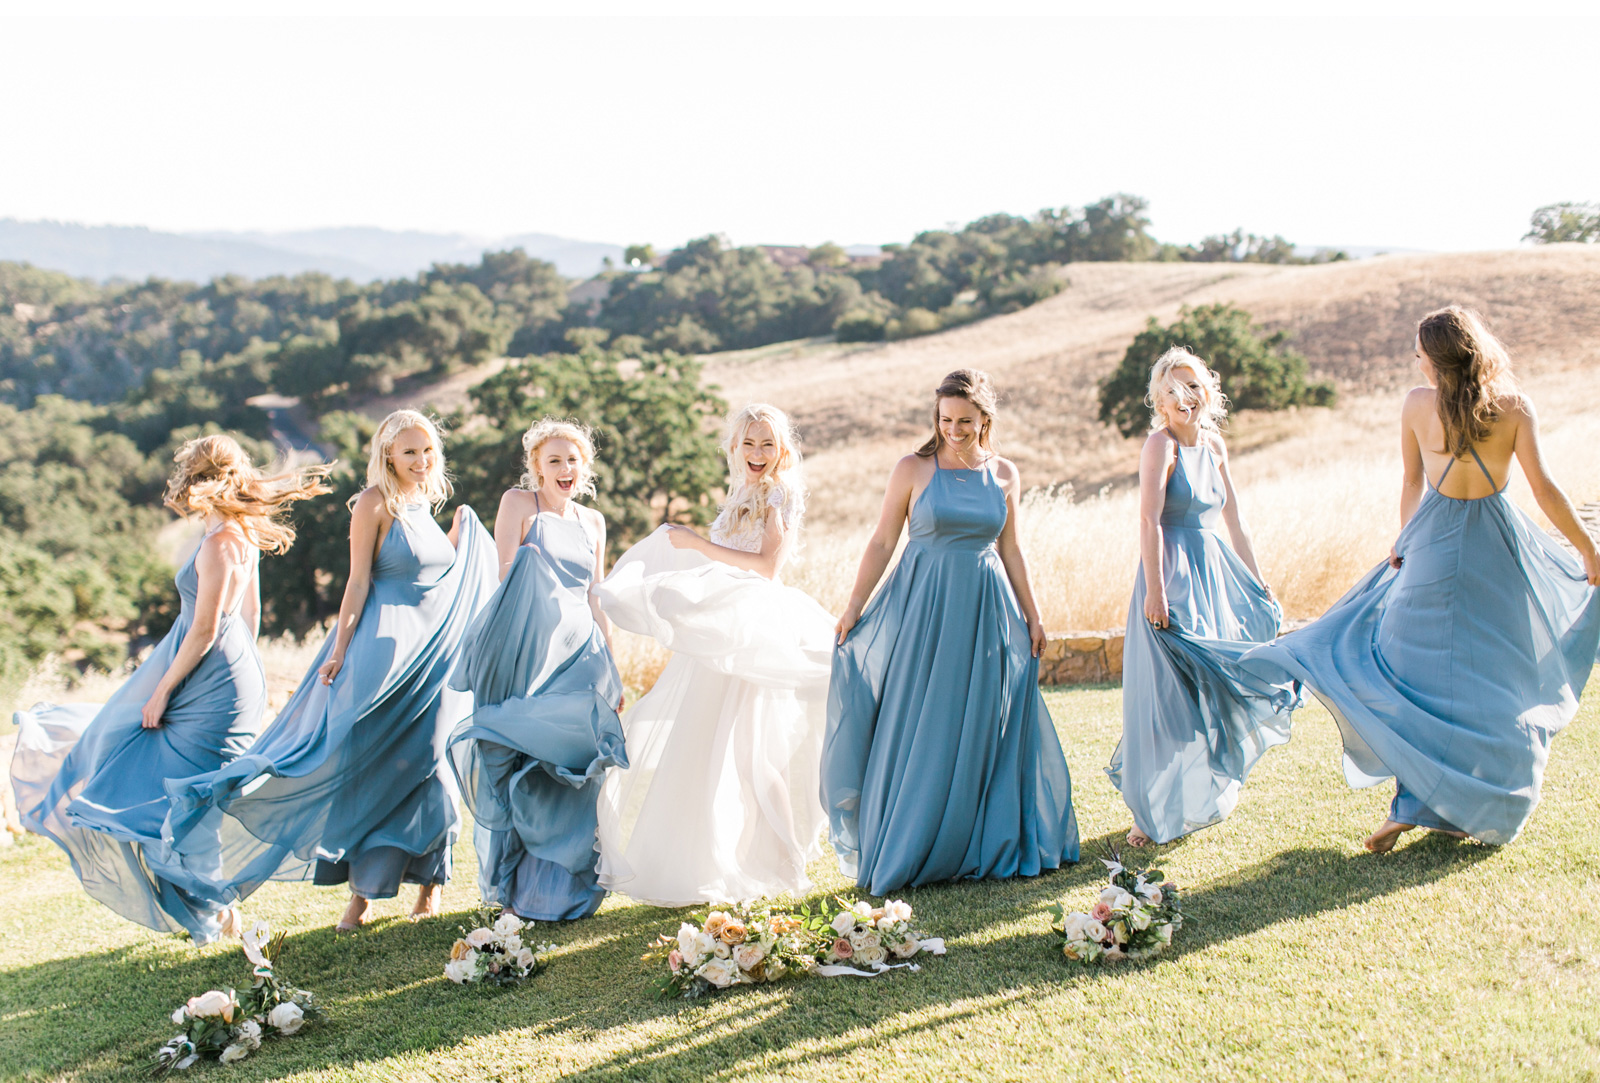 Paso-Robles-Style-Me-Pretty-The-Knot-Wedding-Natalie-Schutt-Photography's-Wedding_04.jpg